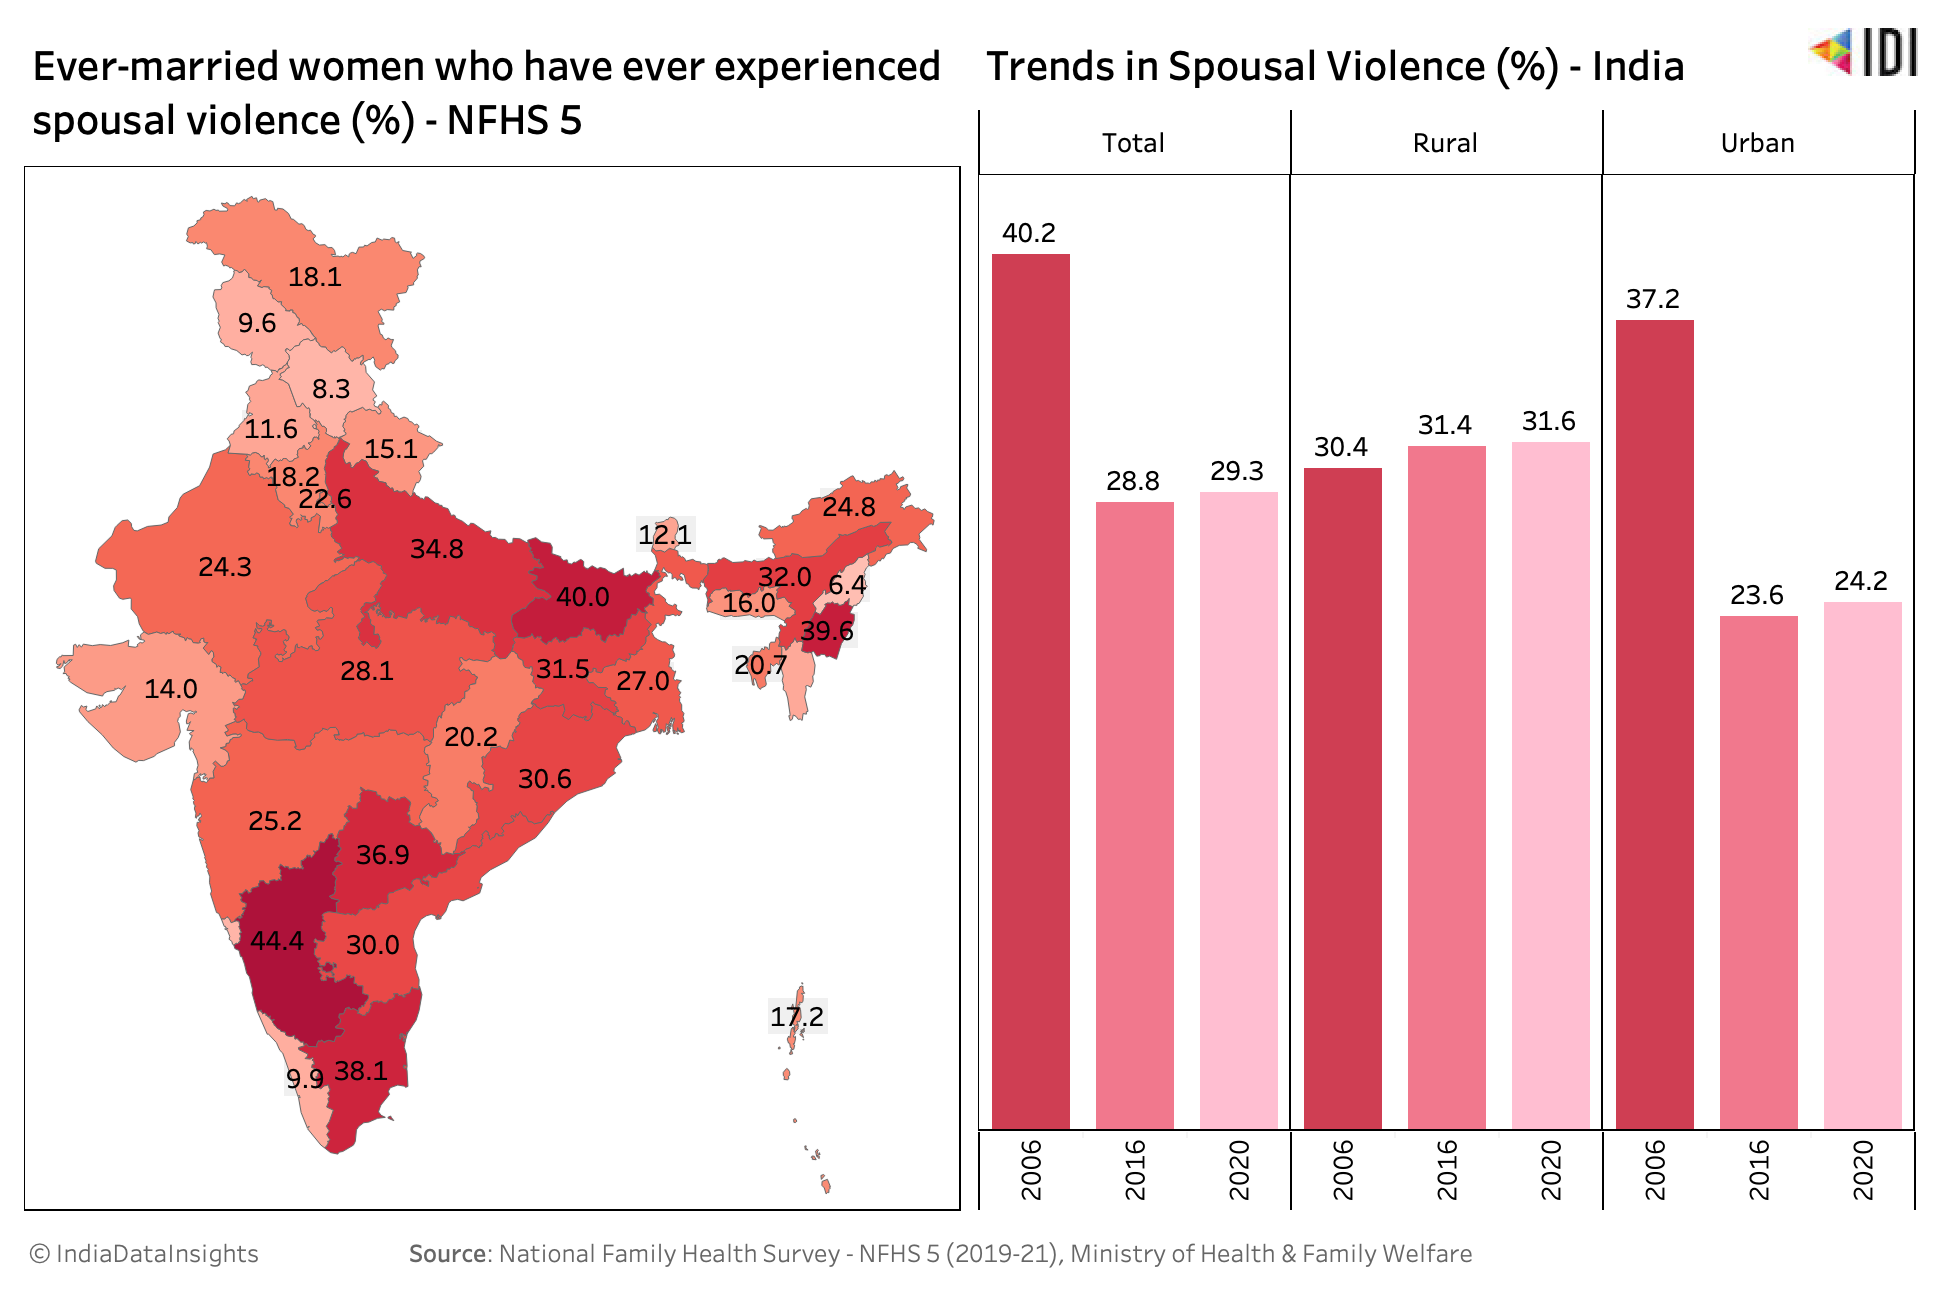 Women experiencing spousal violence in India